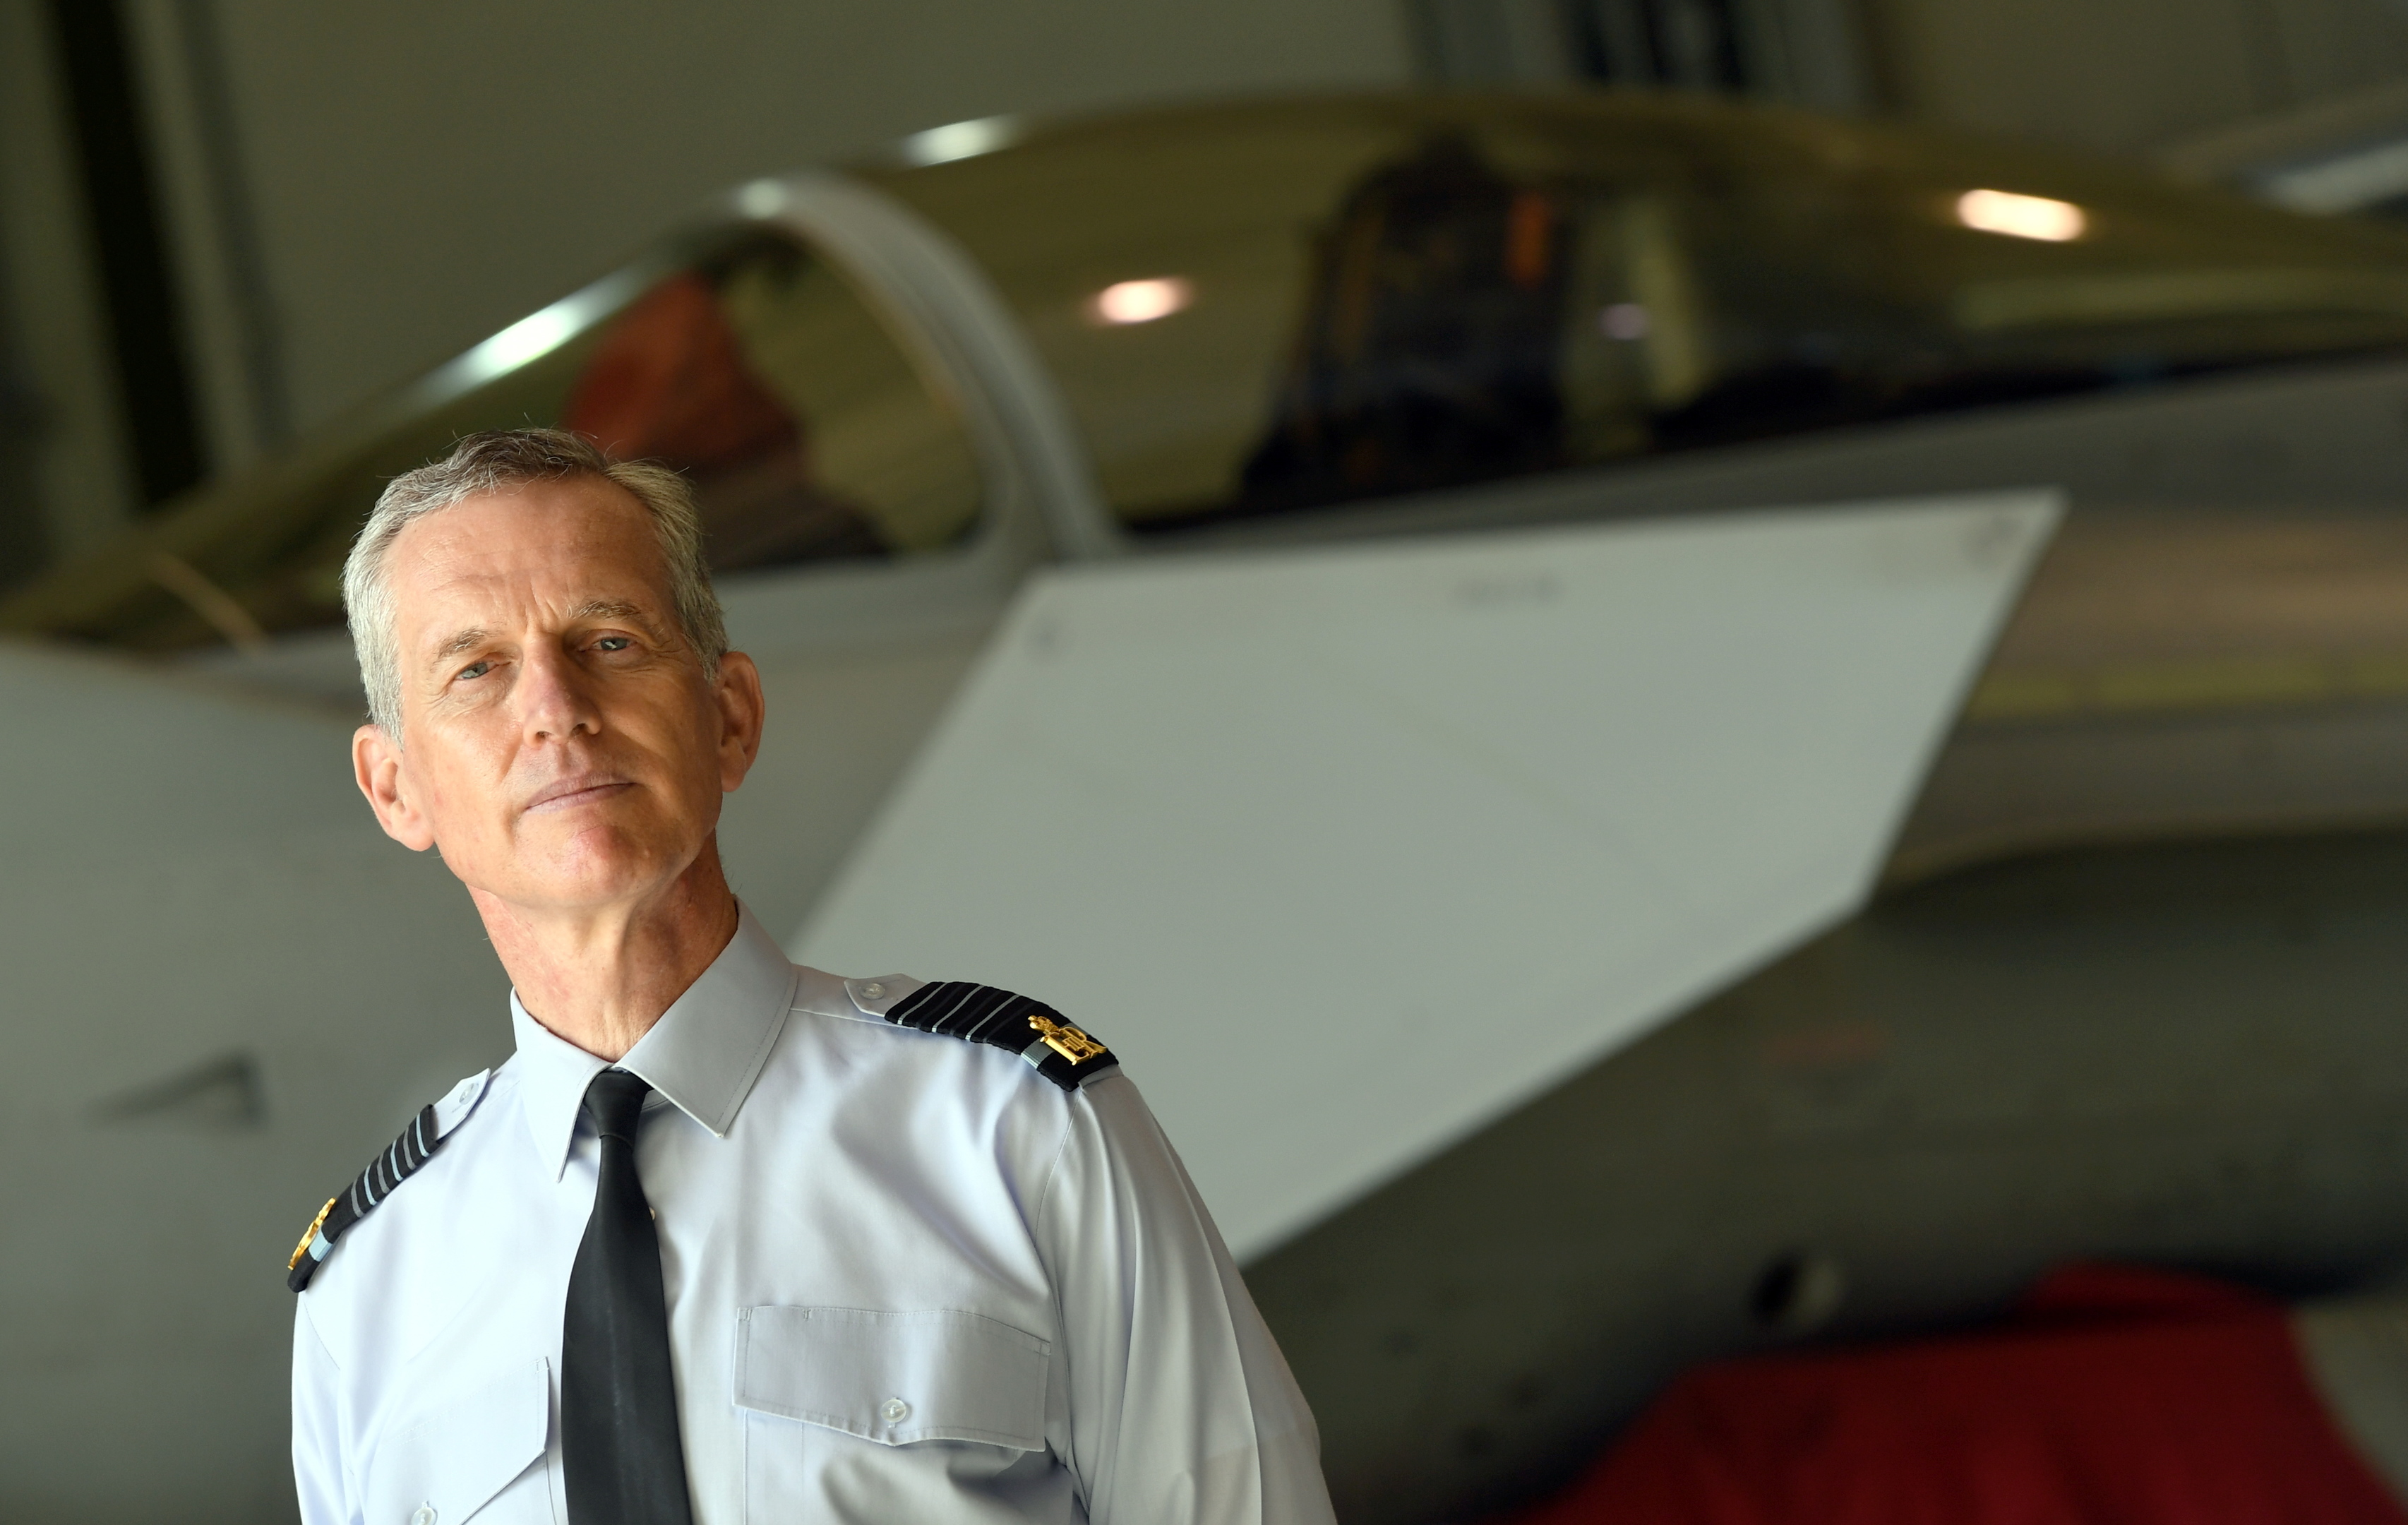 The RAF's Chief of the Air Staff, Sir Stephen Hillier.